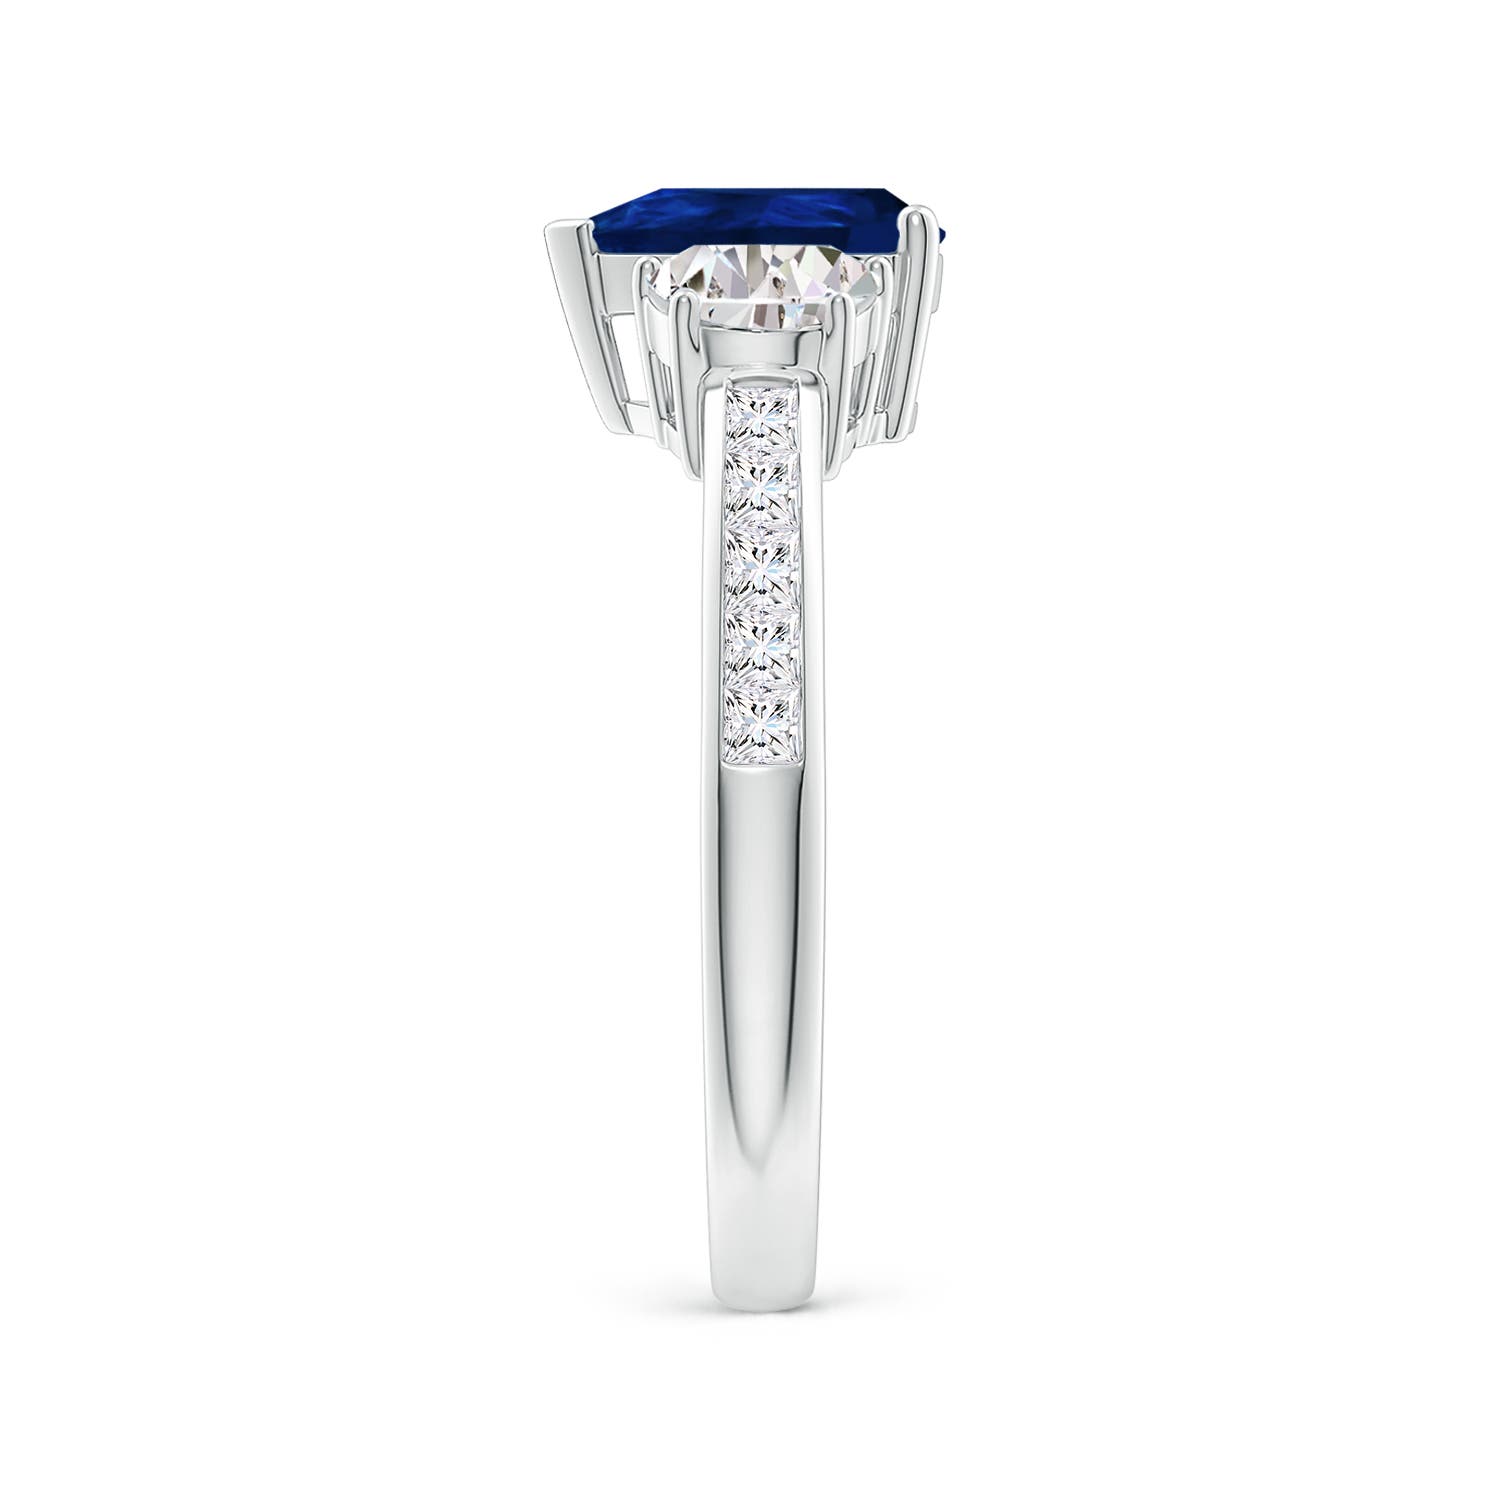 AA - Blue Sapphire / 2.01 CT / 14 KT White Gold